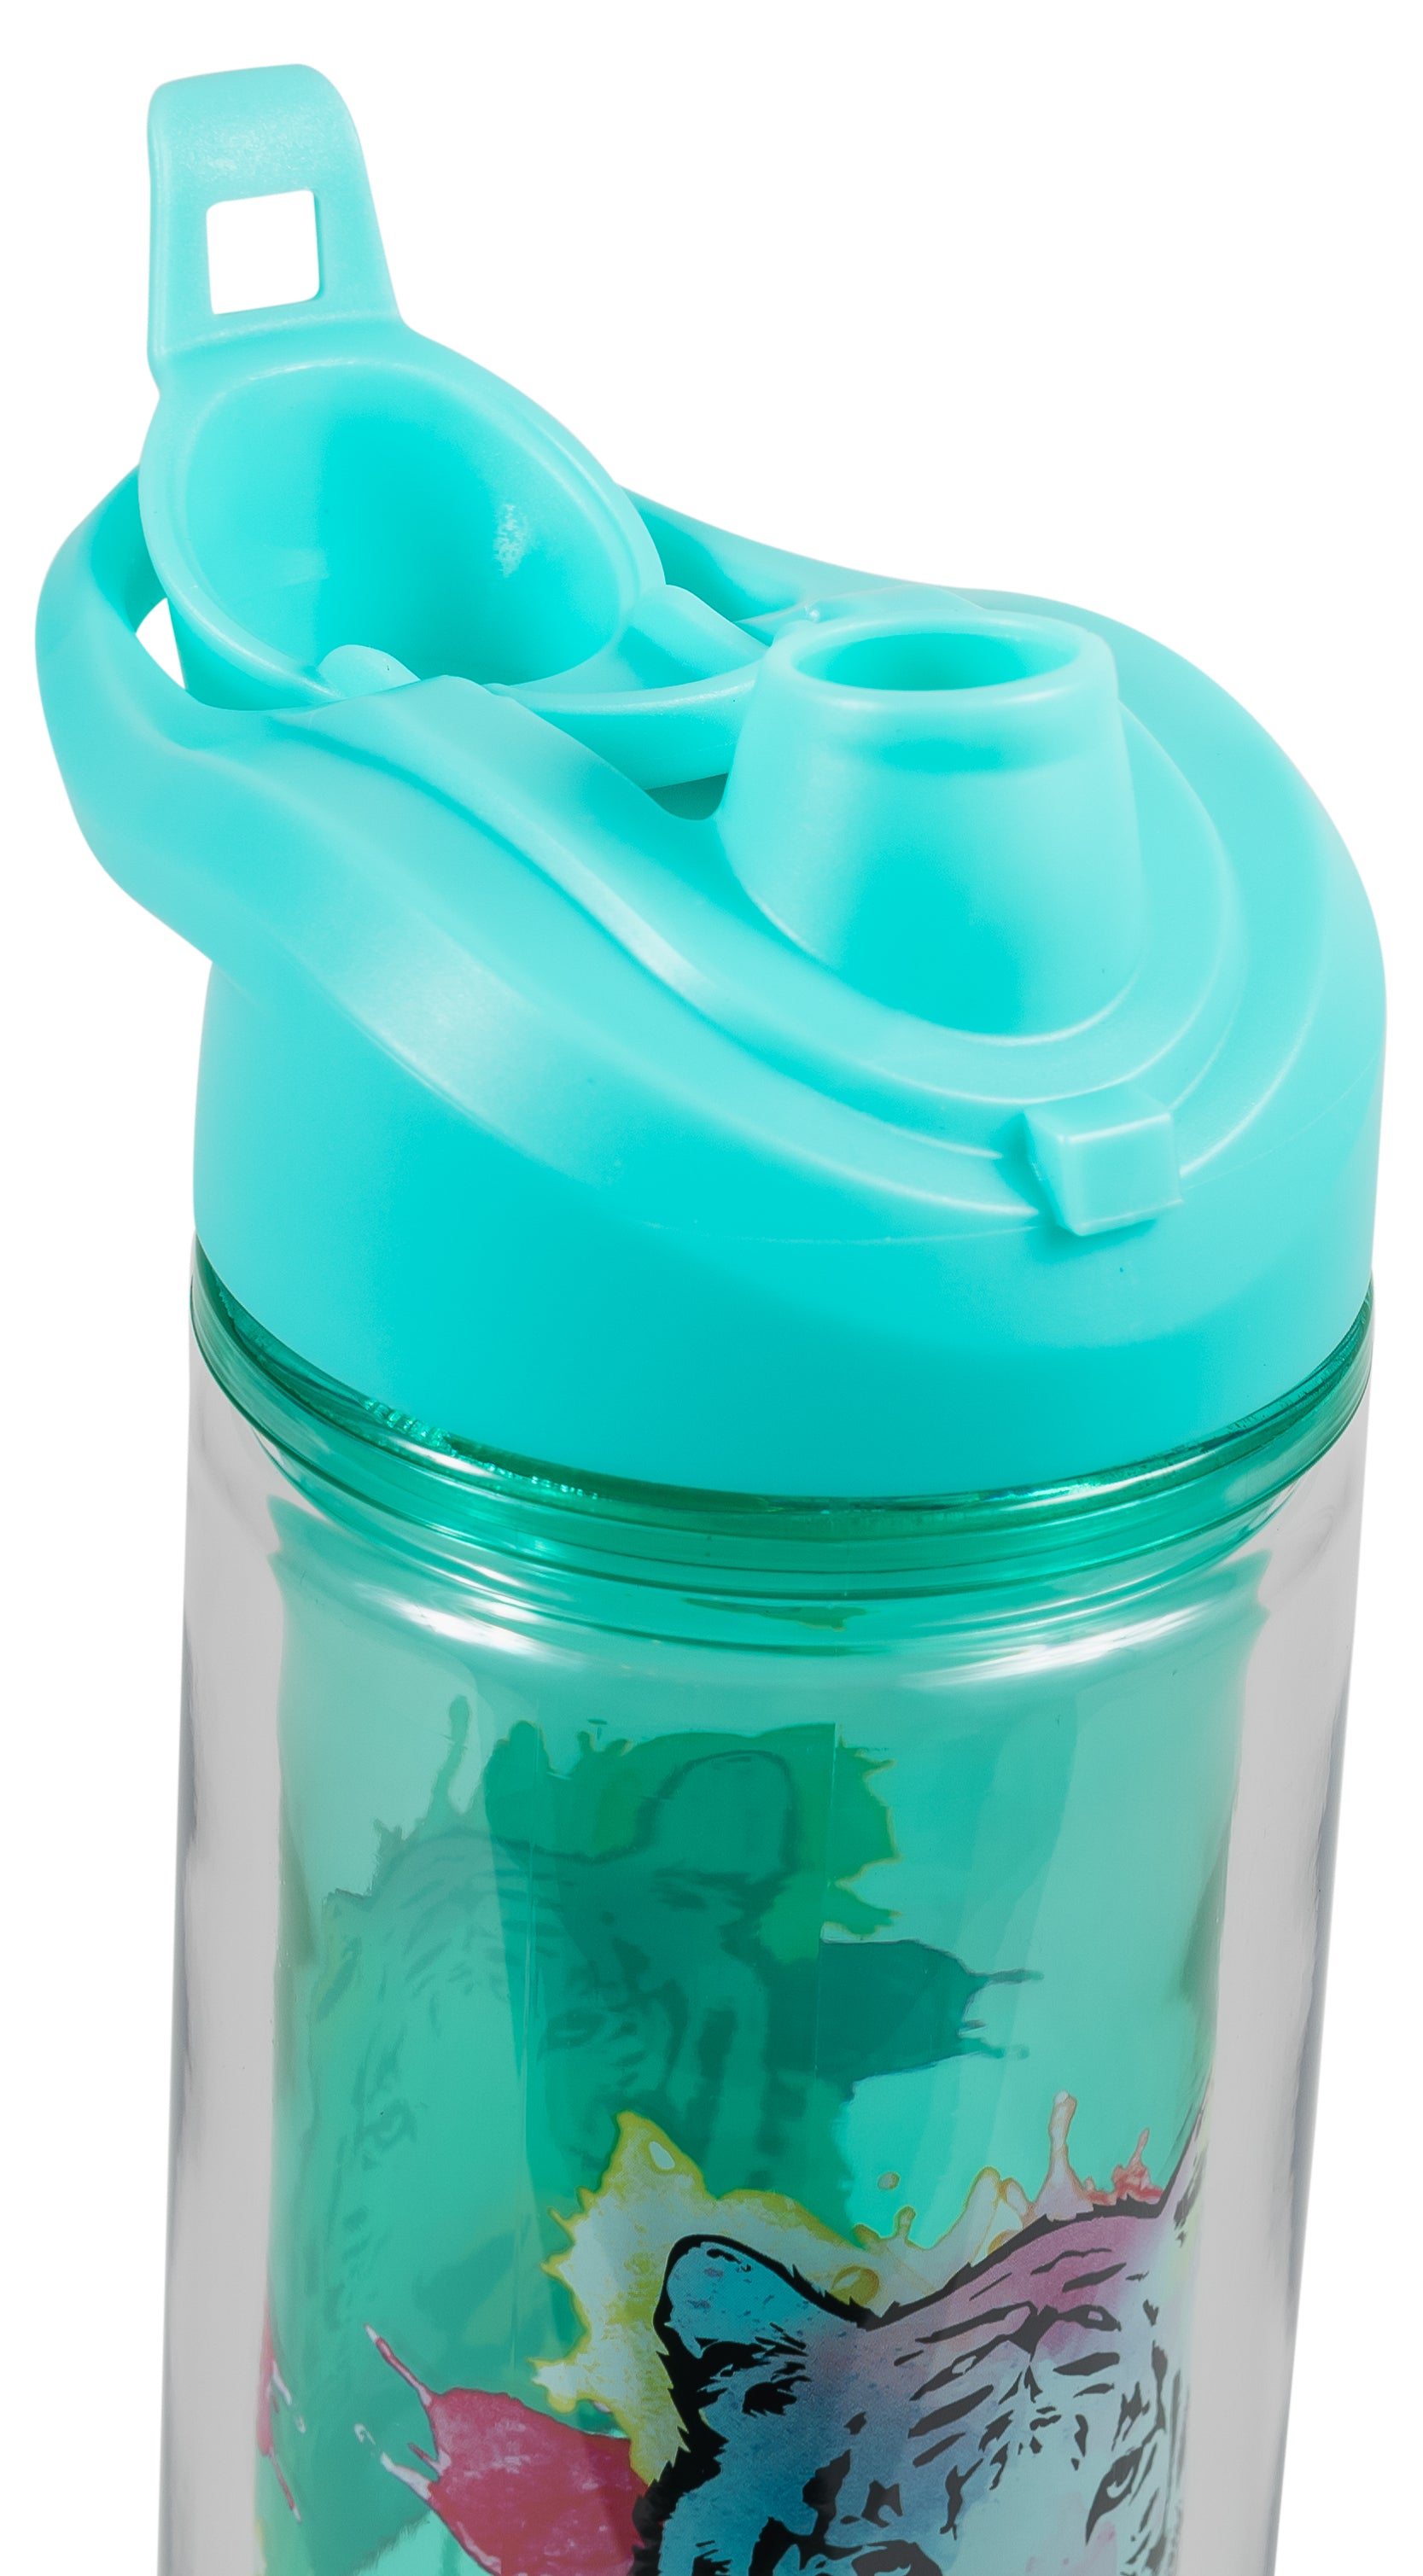 COOL GEAR 2-Pack 20 oz Essence Chugger Water Bottle with Wide Mouth & Flip Cap Design - Unicorn/Leaves - image 3 of 6